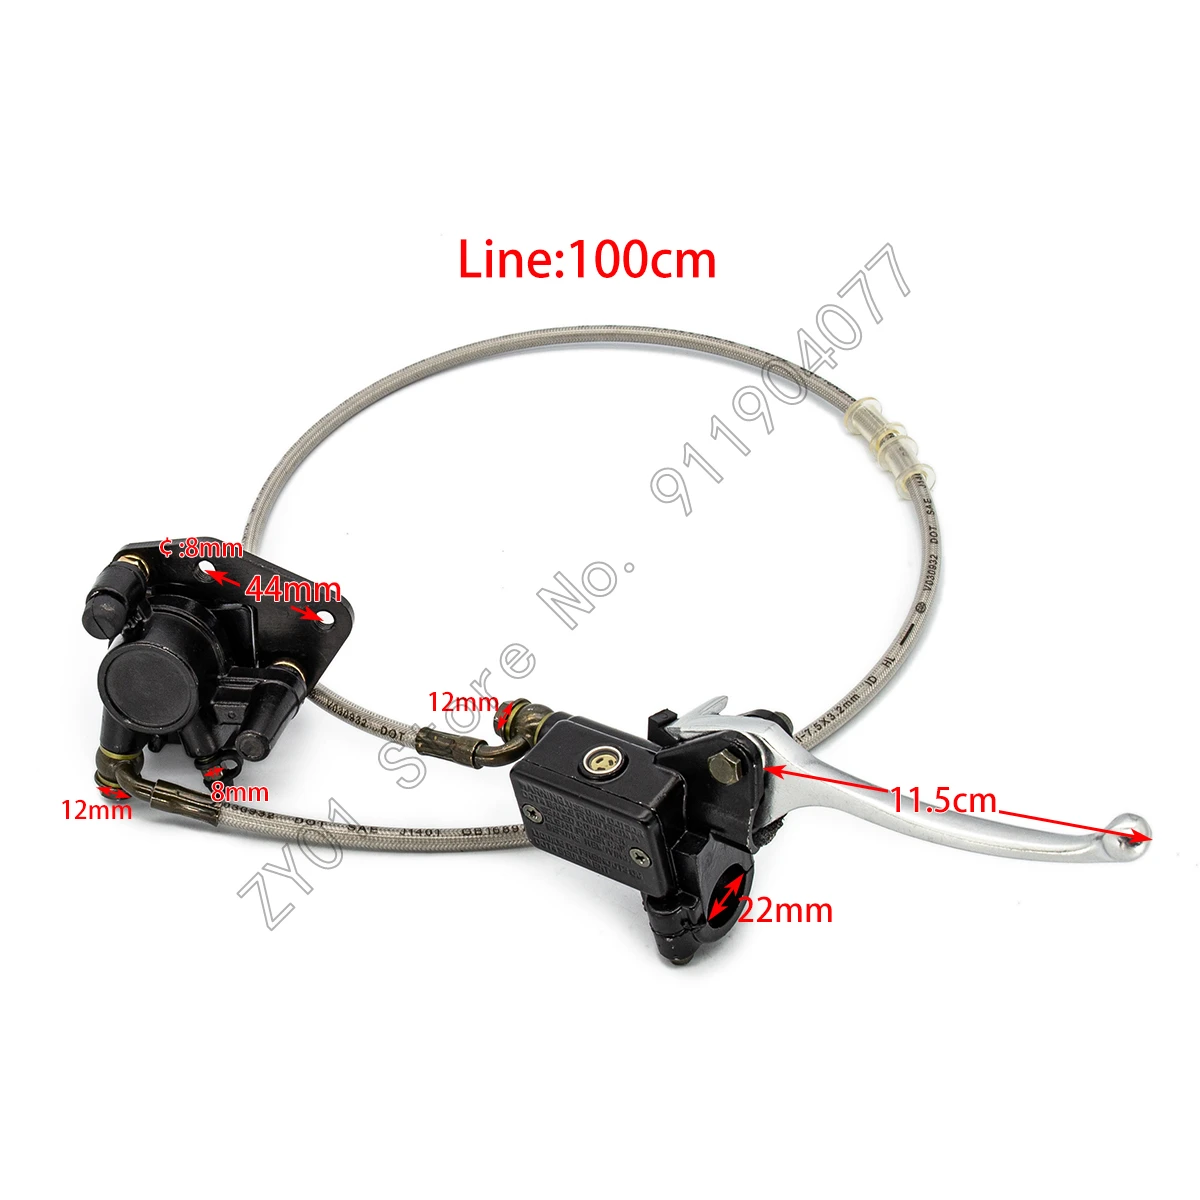 

M10 Motorcycle Parts Disc Brakes Front Calipers Clamp Lower Pump Assembly For Small Off Road Bike Dirt Pit Scooter